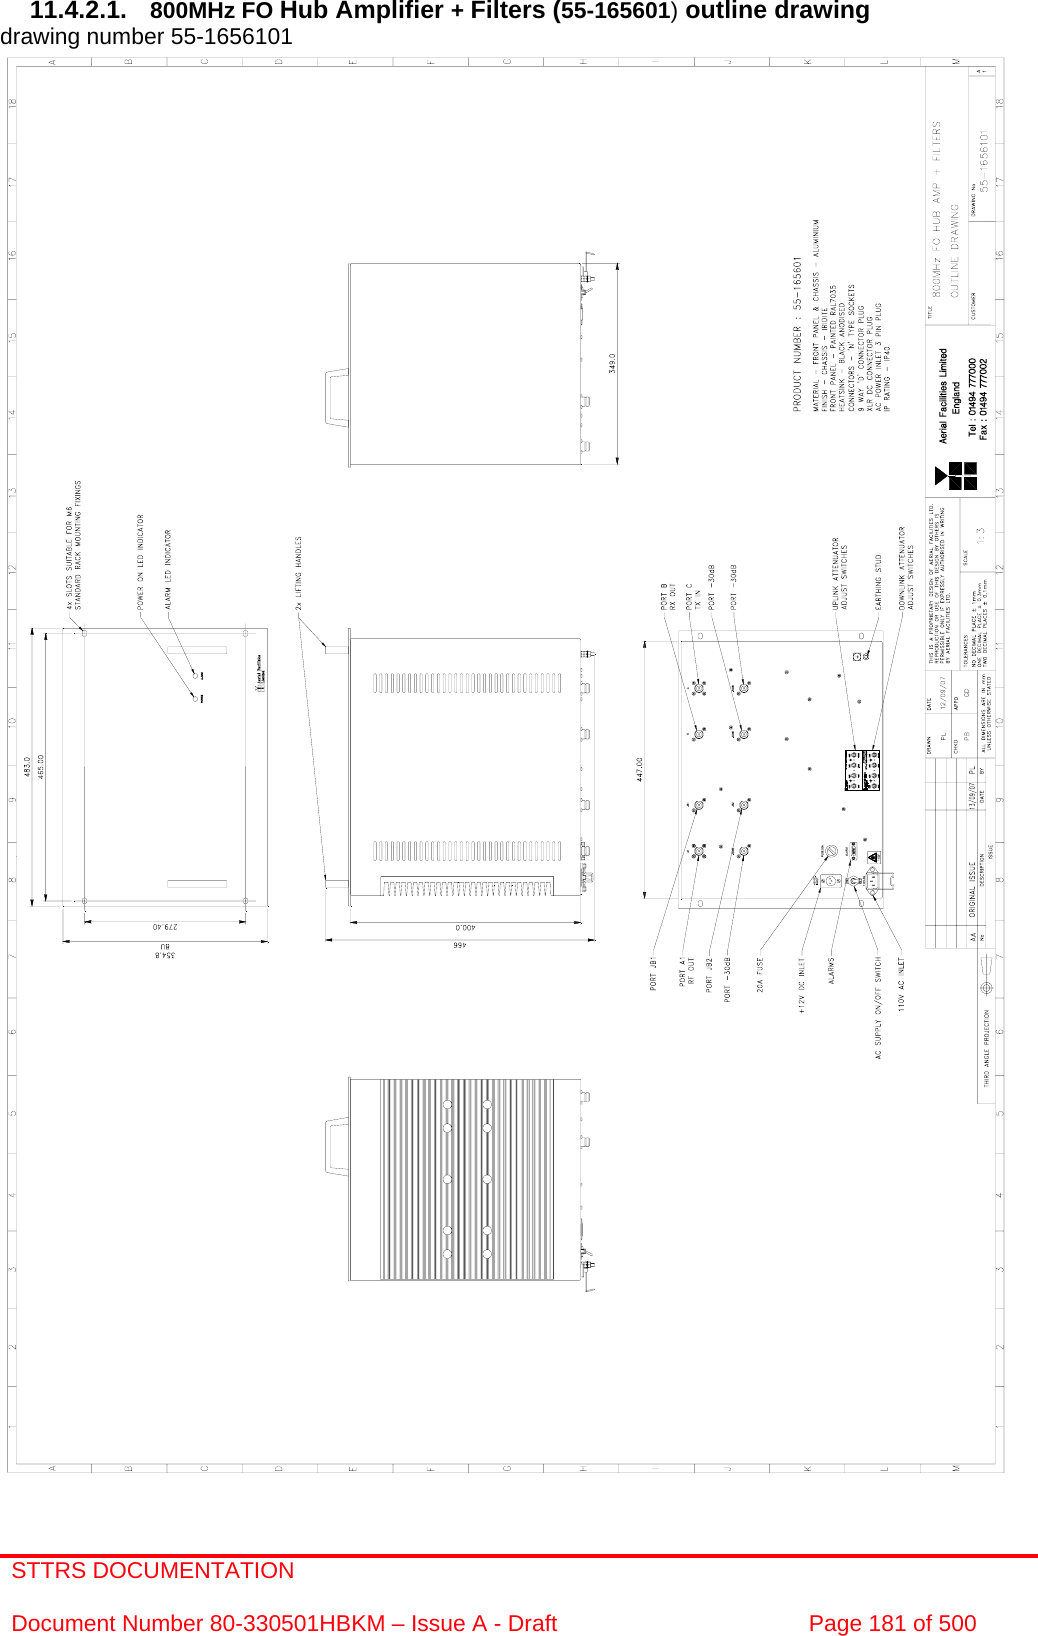 STTRS DOCUMENTATION  Document Number 80-330501HBKM – Issue A - Draft  Page 181 of 500   11.4.2.1.  800MHz FO Hub Amplifier + Filters (55-165601) outline drawing drawing number 55-1656101                                                    